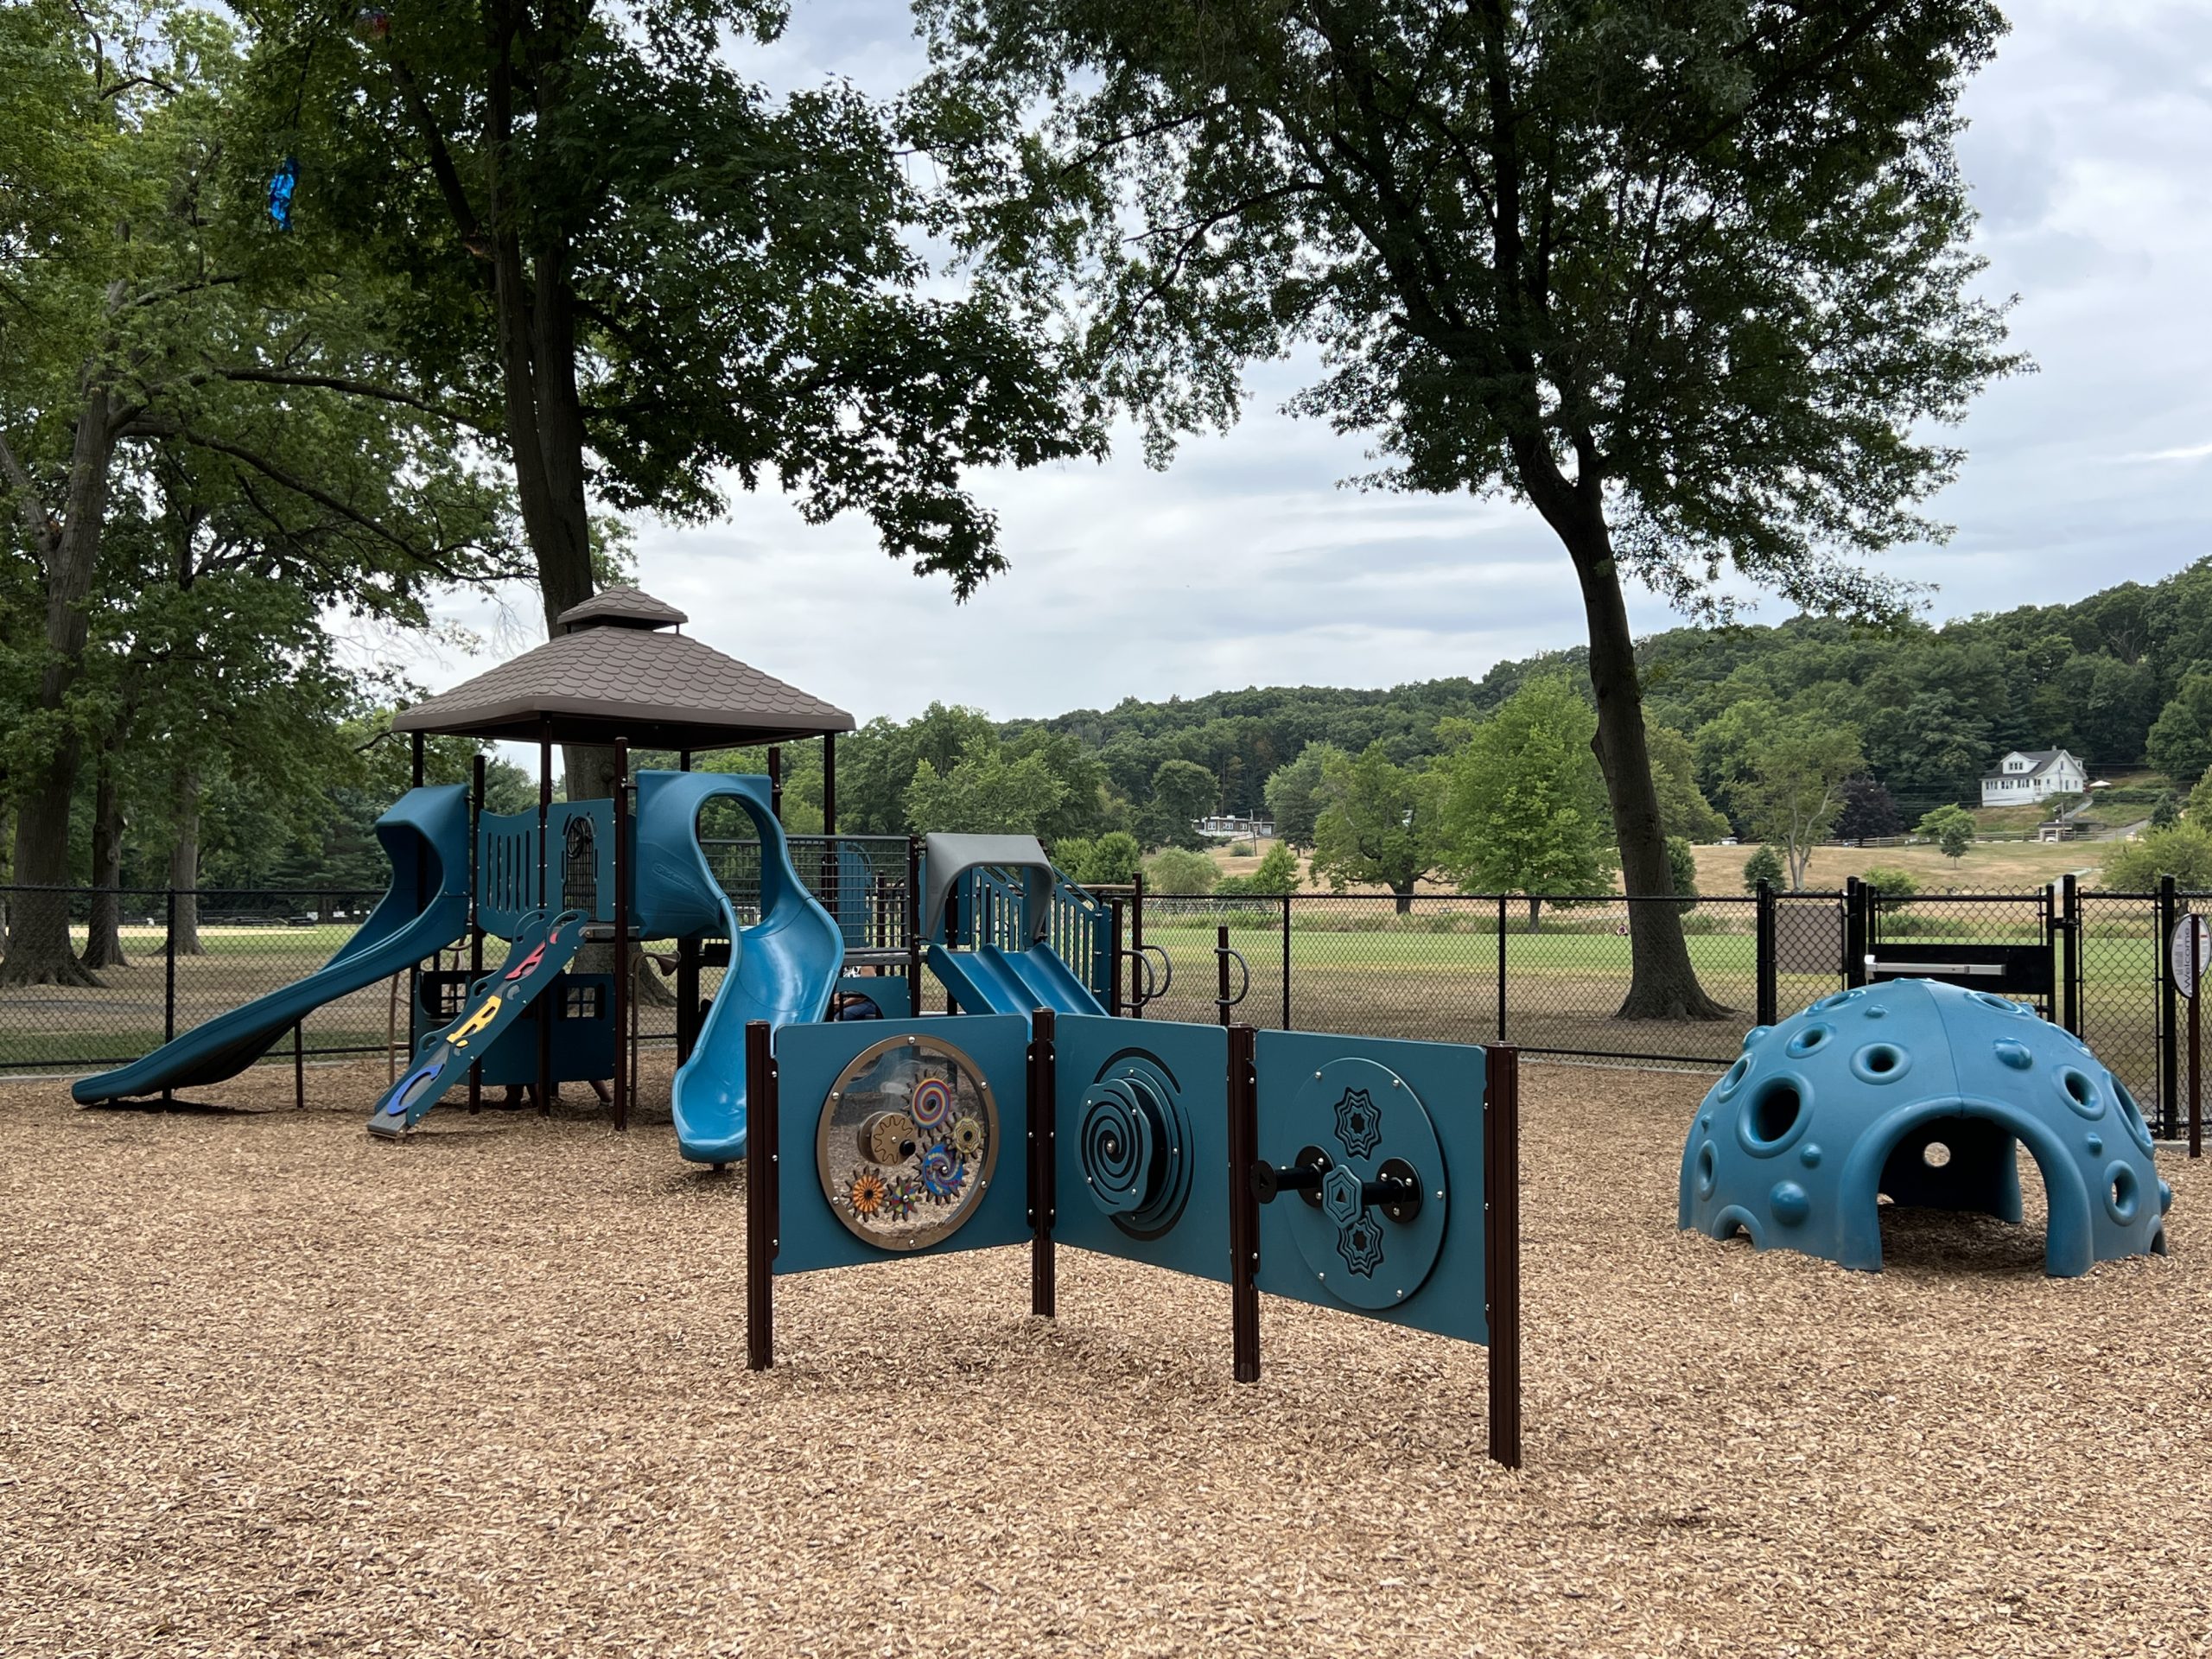 Goffle Brook Park Playground in Hawthorne NJ - WIDE image - small playground, sensory wall, and climbing dome